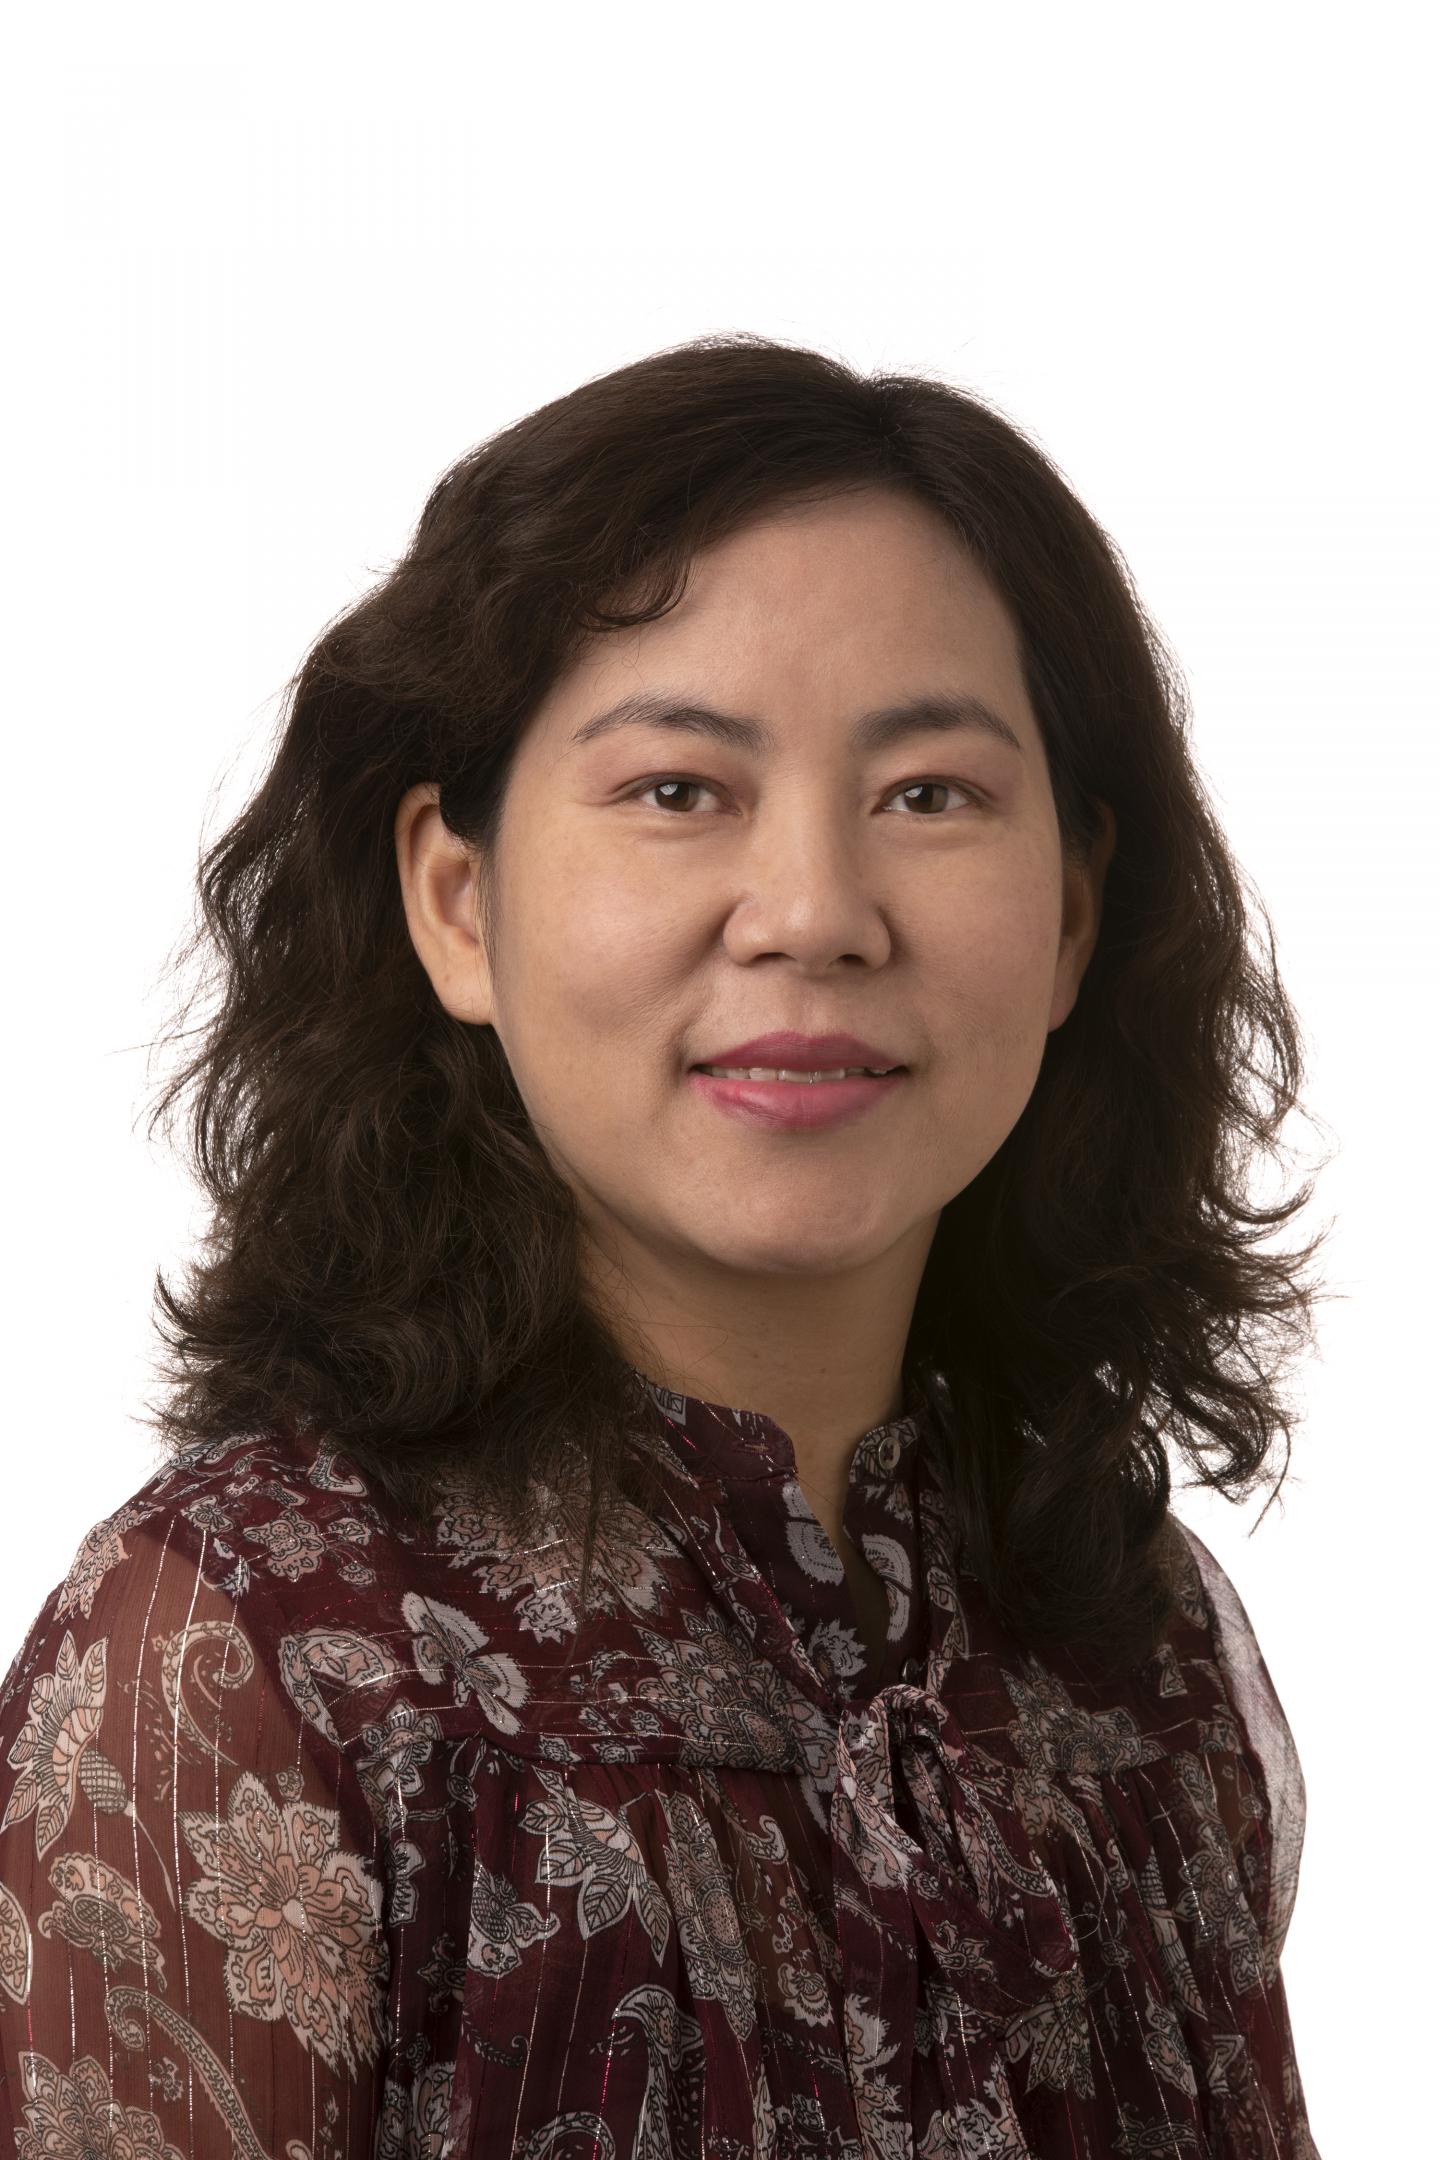 Xiaowei Dong, Associate Professor and P1 Curriculum Director at HSC College of Pharmacy